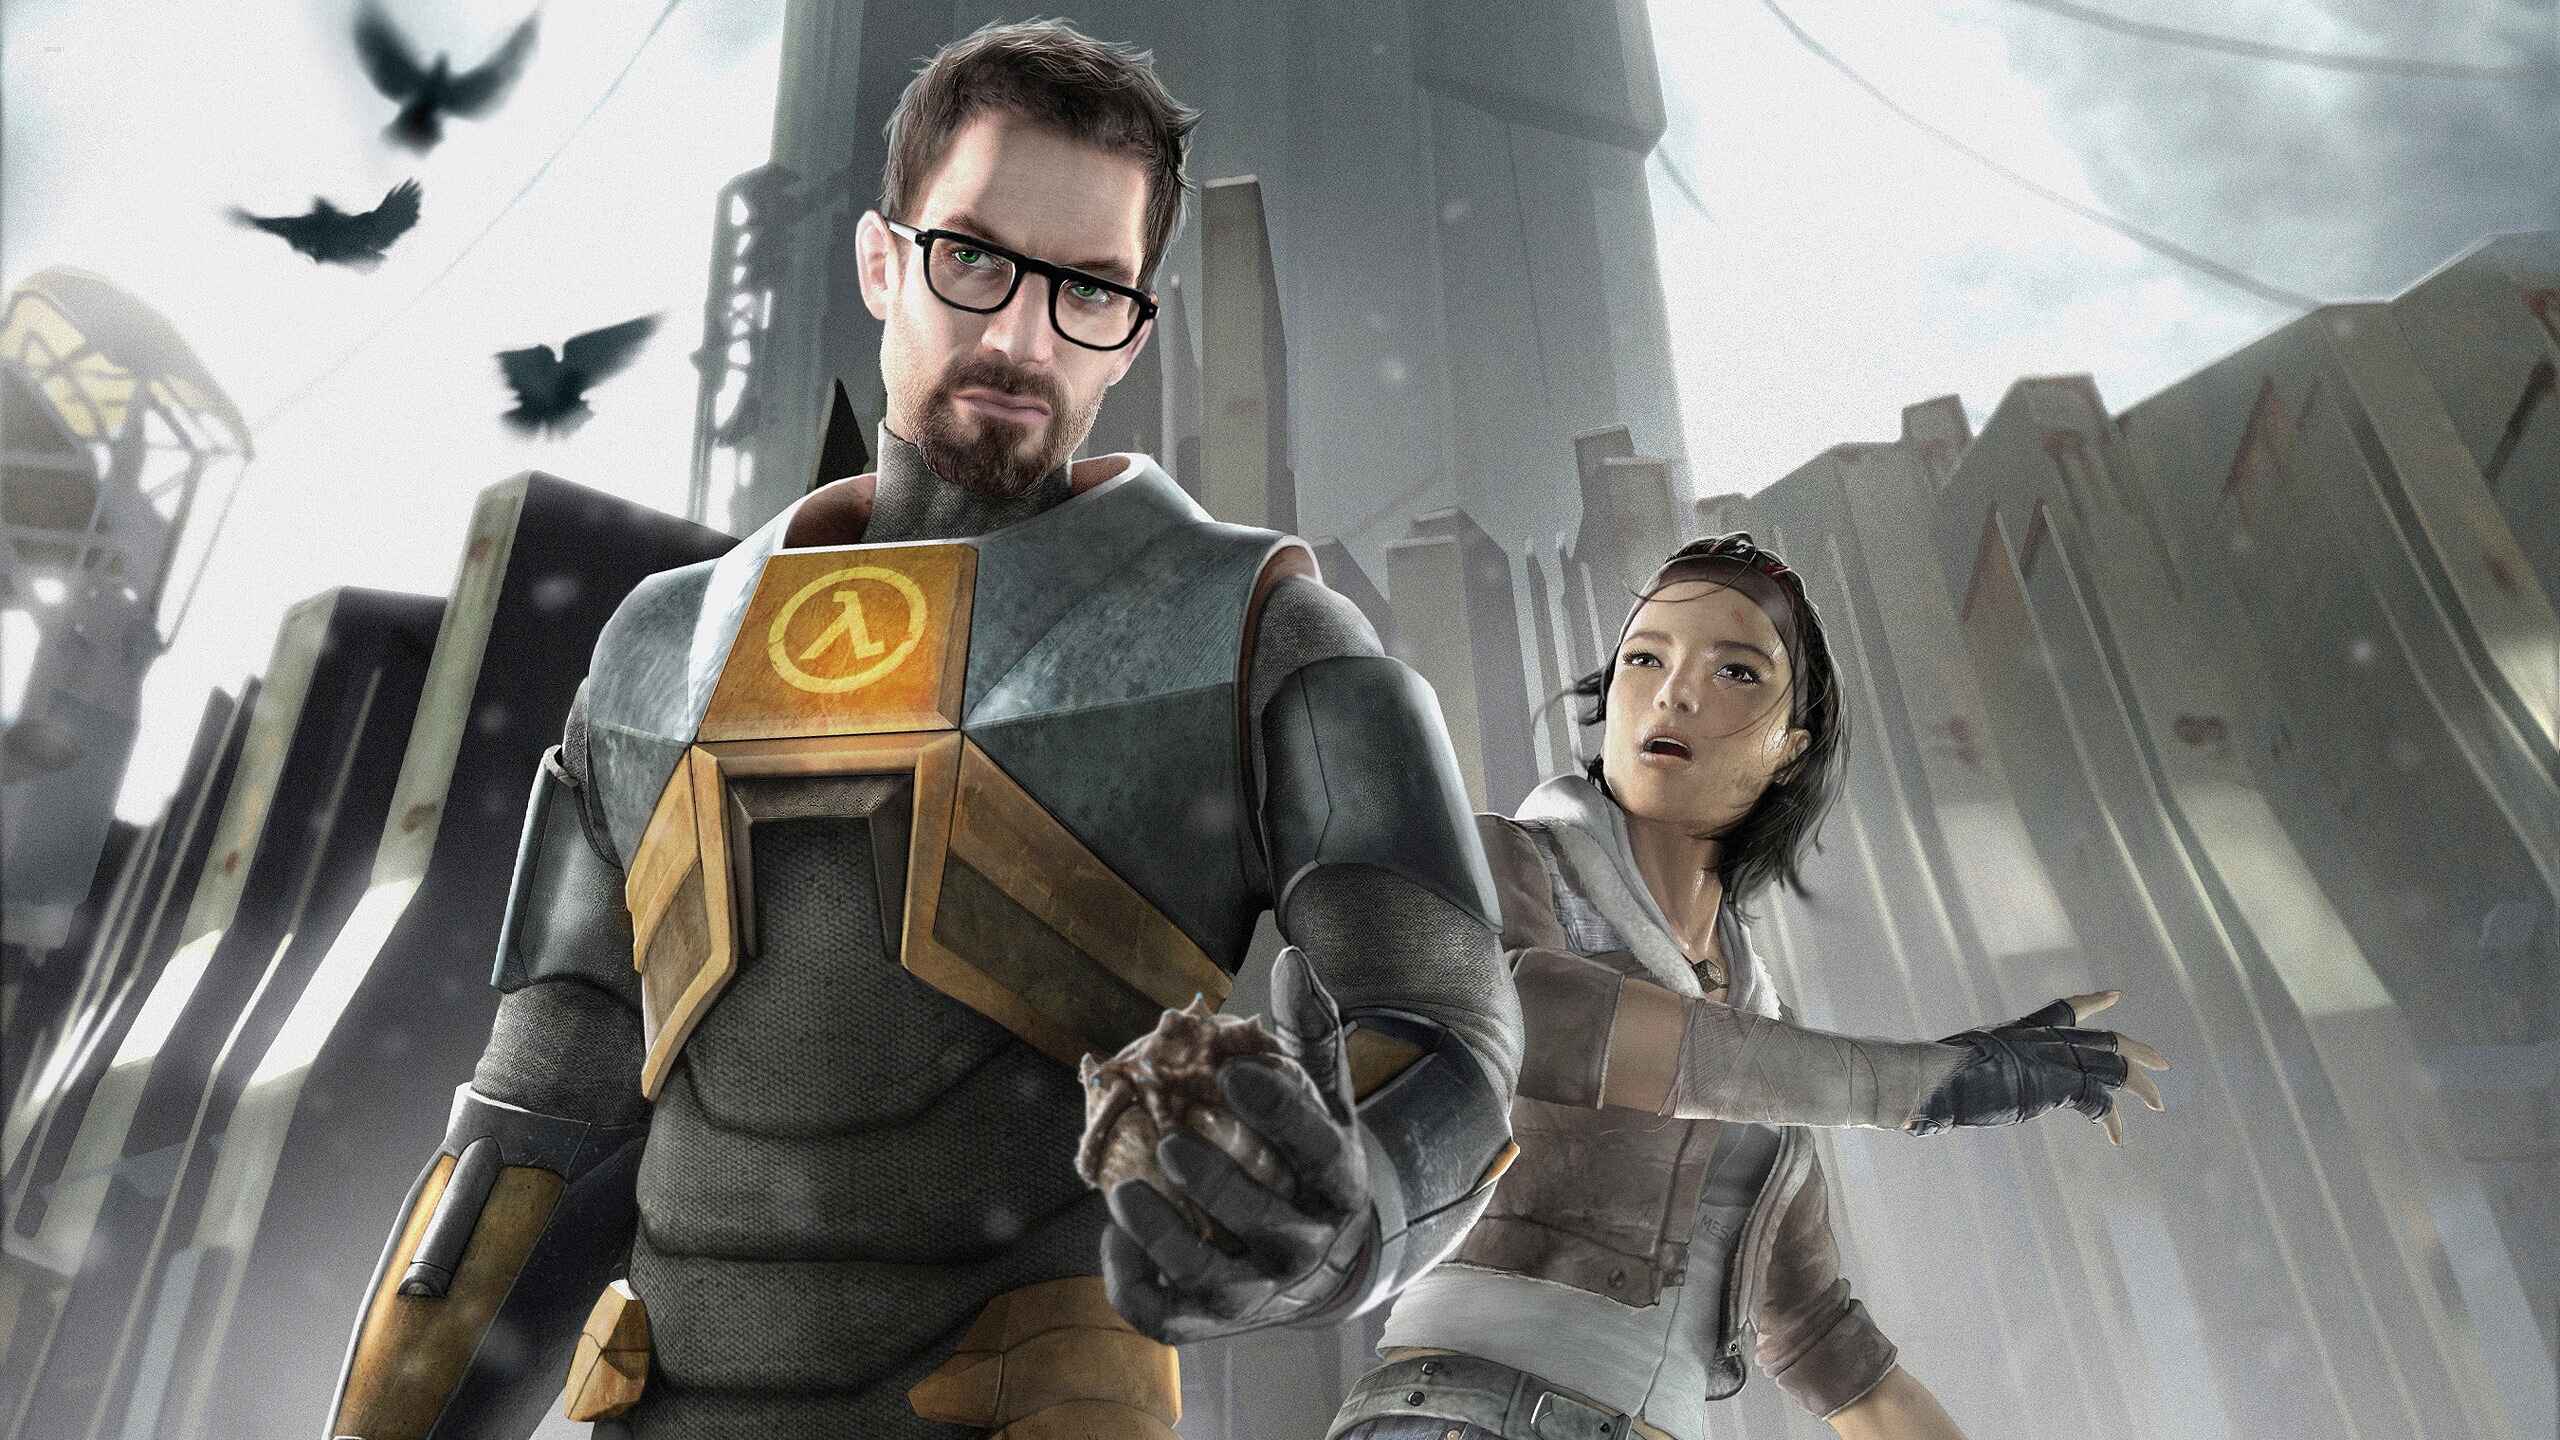 The Half-Life franchise was a milestone in the gaming industry with its combination of action and immersive story (Image: Steam)